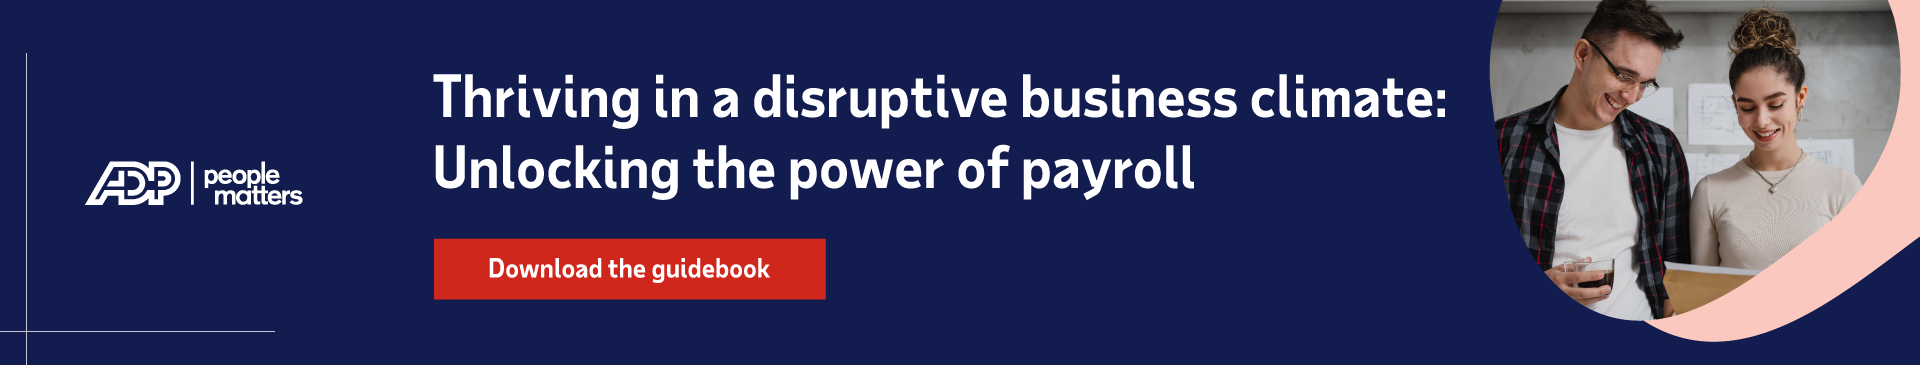 Thriving in a disruptive business climate: Unlocking the power of payroll